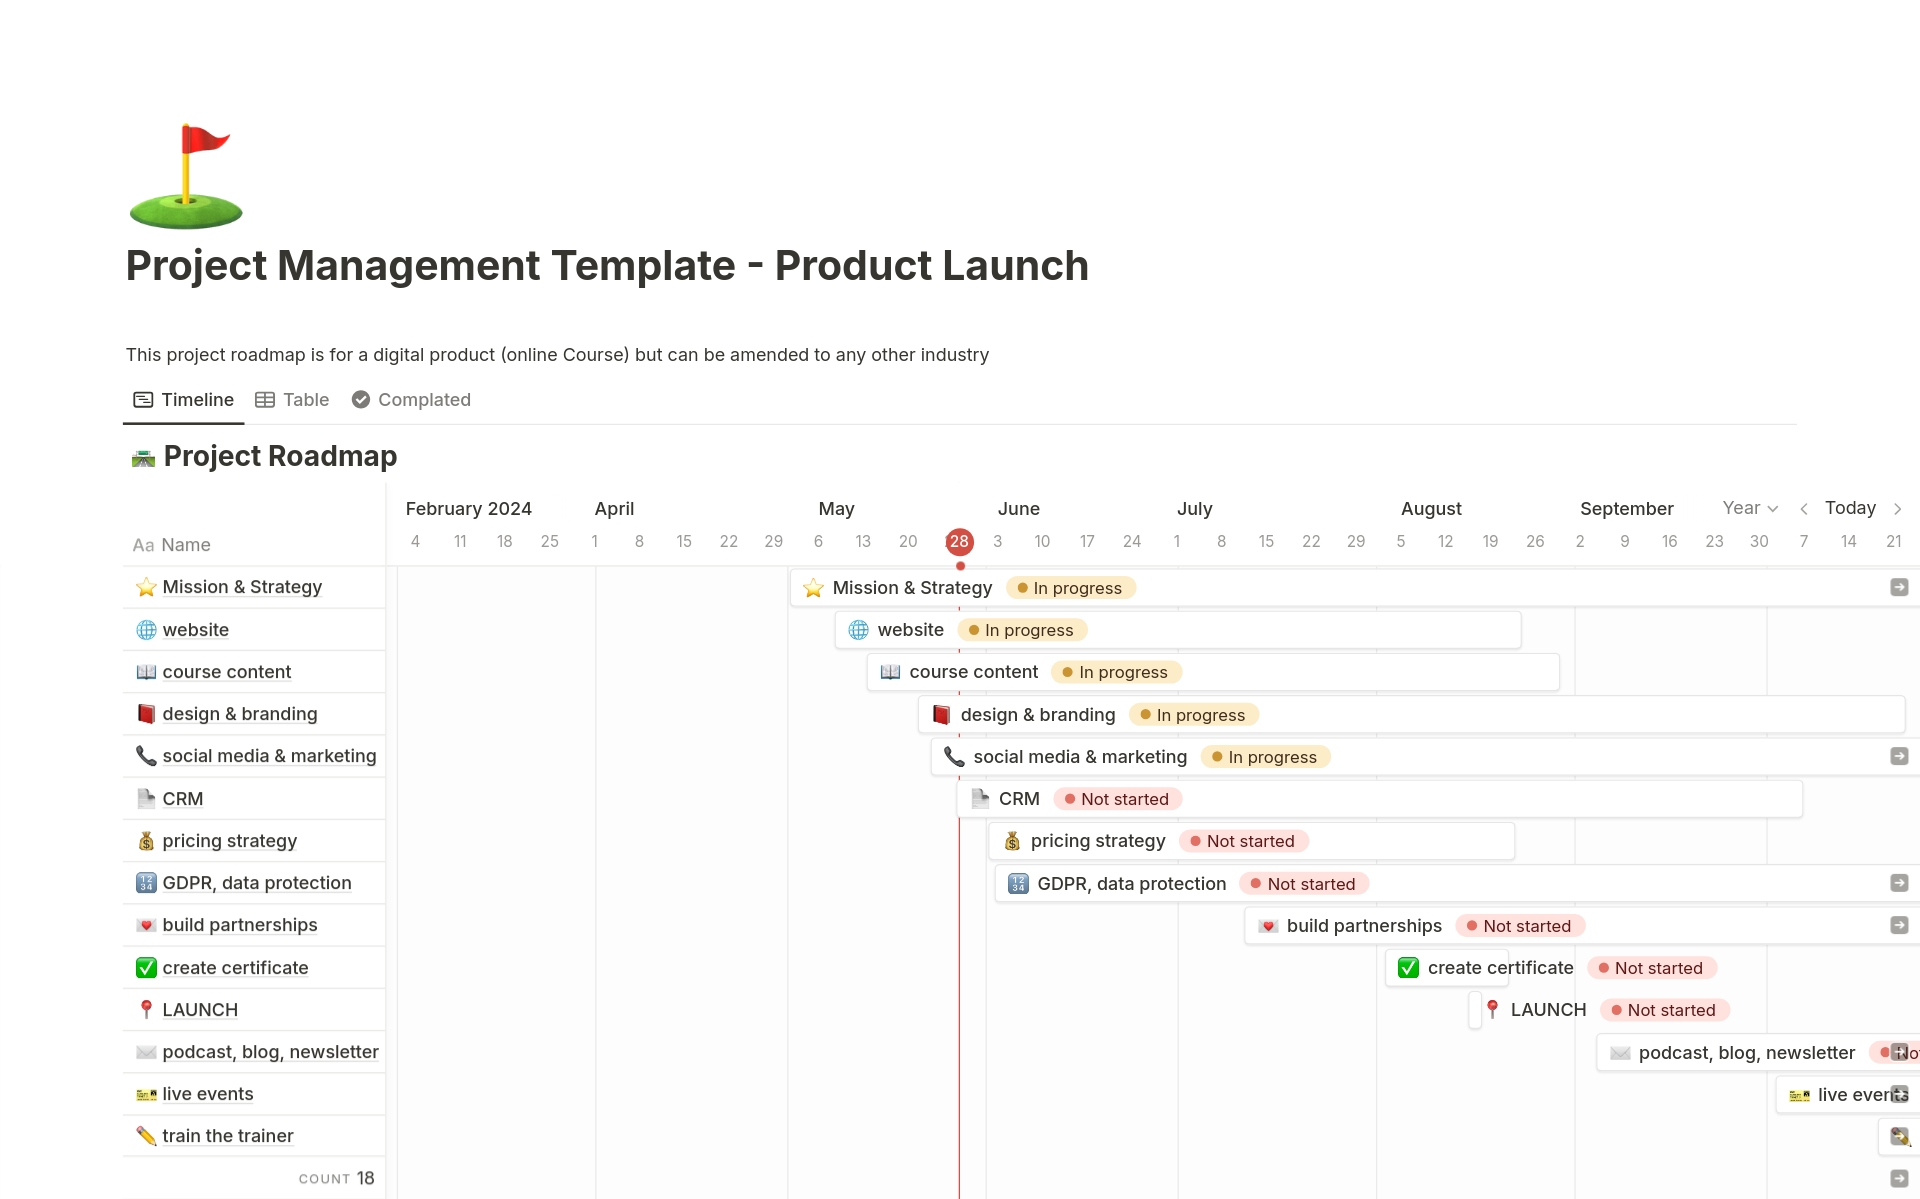 use this template to 
- manage and plan your project
- launch a product, e.g. an online course
- separate your projects into sub-tasks 
- create a timeline for any project